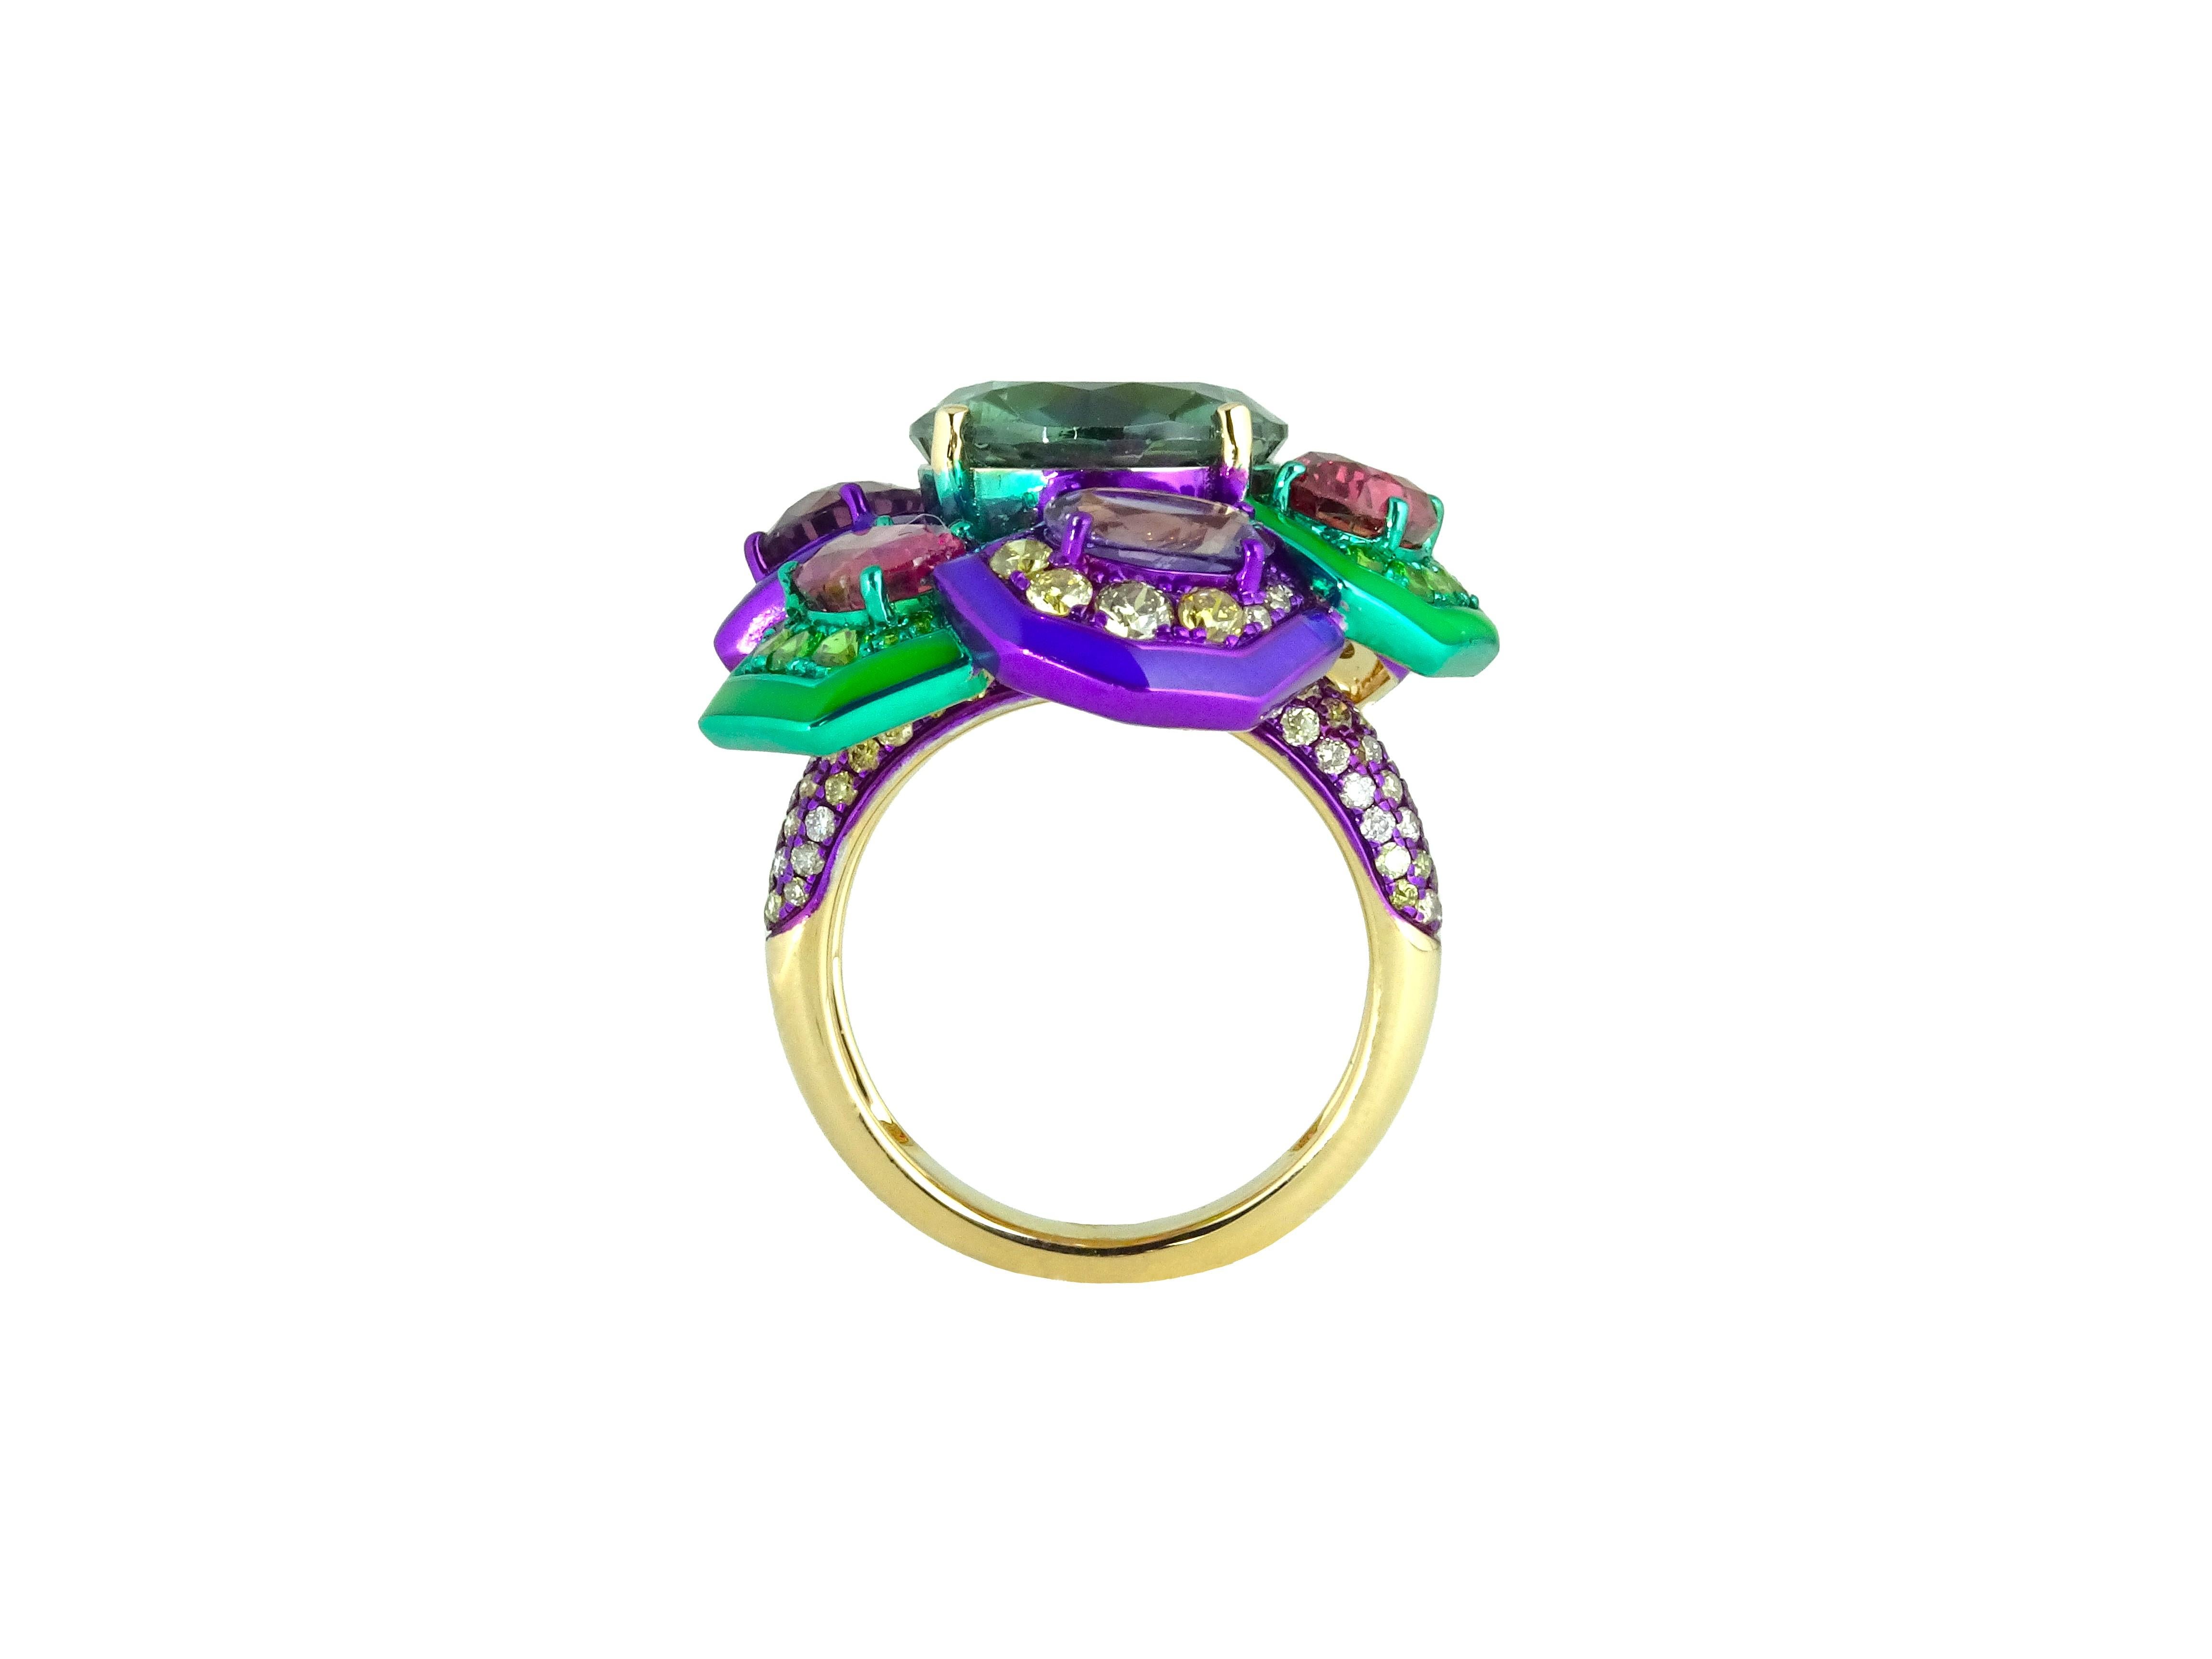 The Hexa-Overlapping Ring from 'The 10th Dimension Collection' by Austy Lee. This colorful, brand new ring is made of Indicolite Tourmaline, Sri Lankan Sapphires, Fancy Color Diamond, Tsavorite, with Mint Green & Purple Enamel on color-plated 18K